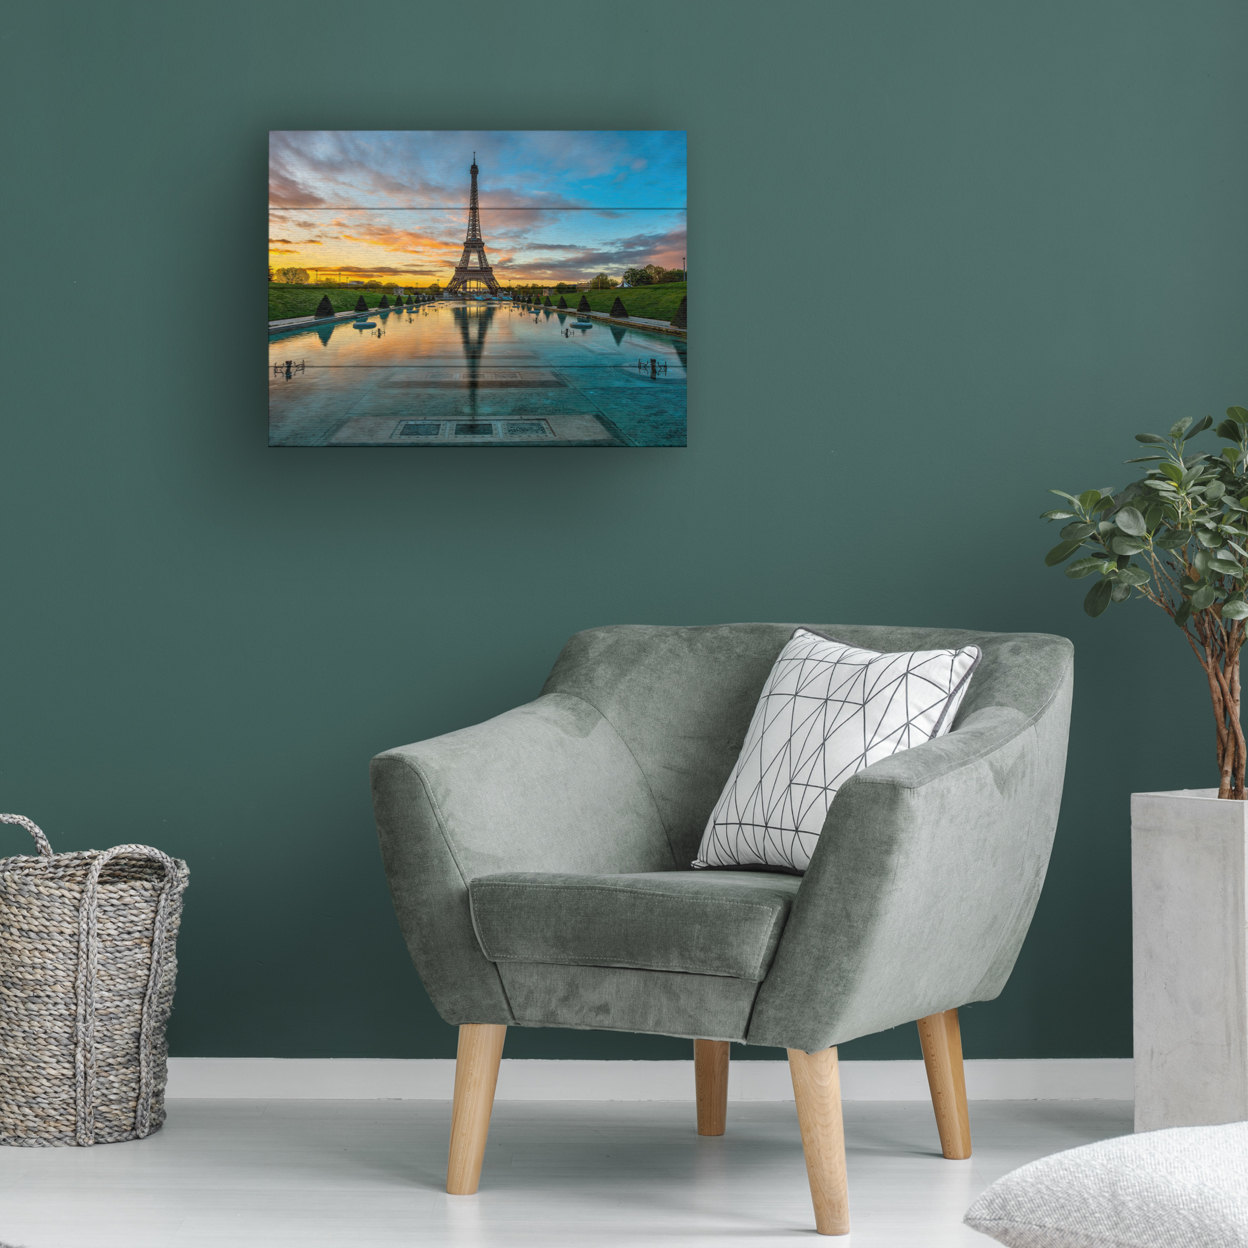 Wall Art 12 X 16 Inches Titled Sunrise In Paris Ready To Hang Printed On Wooden Planks